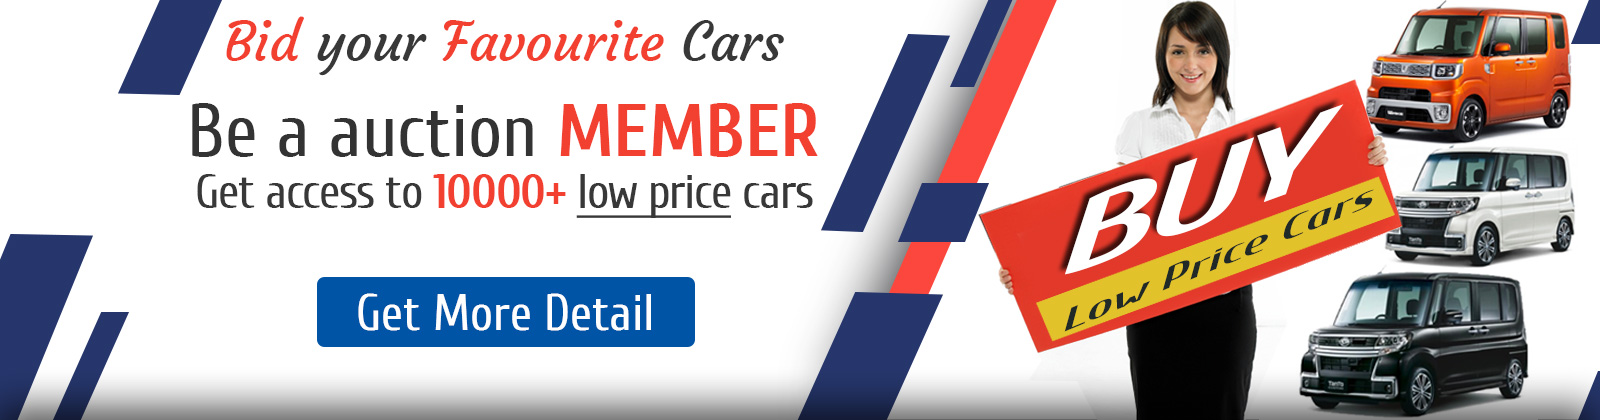 Access Live AUCTION Select from 10000+ Cars on Low Price Become a Member